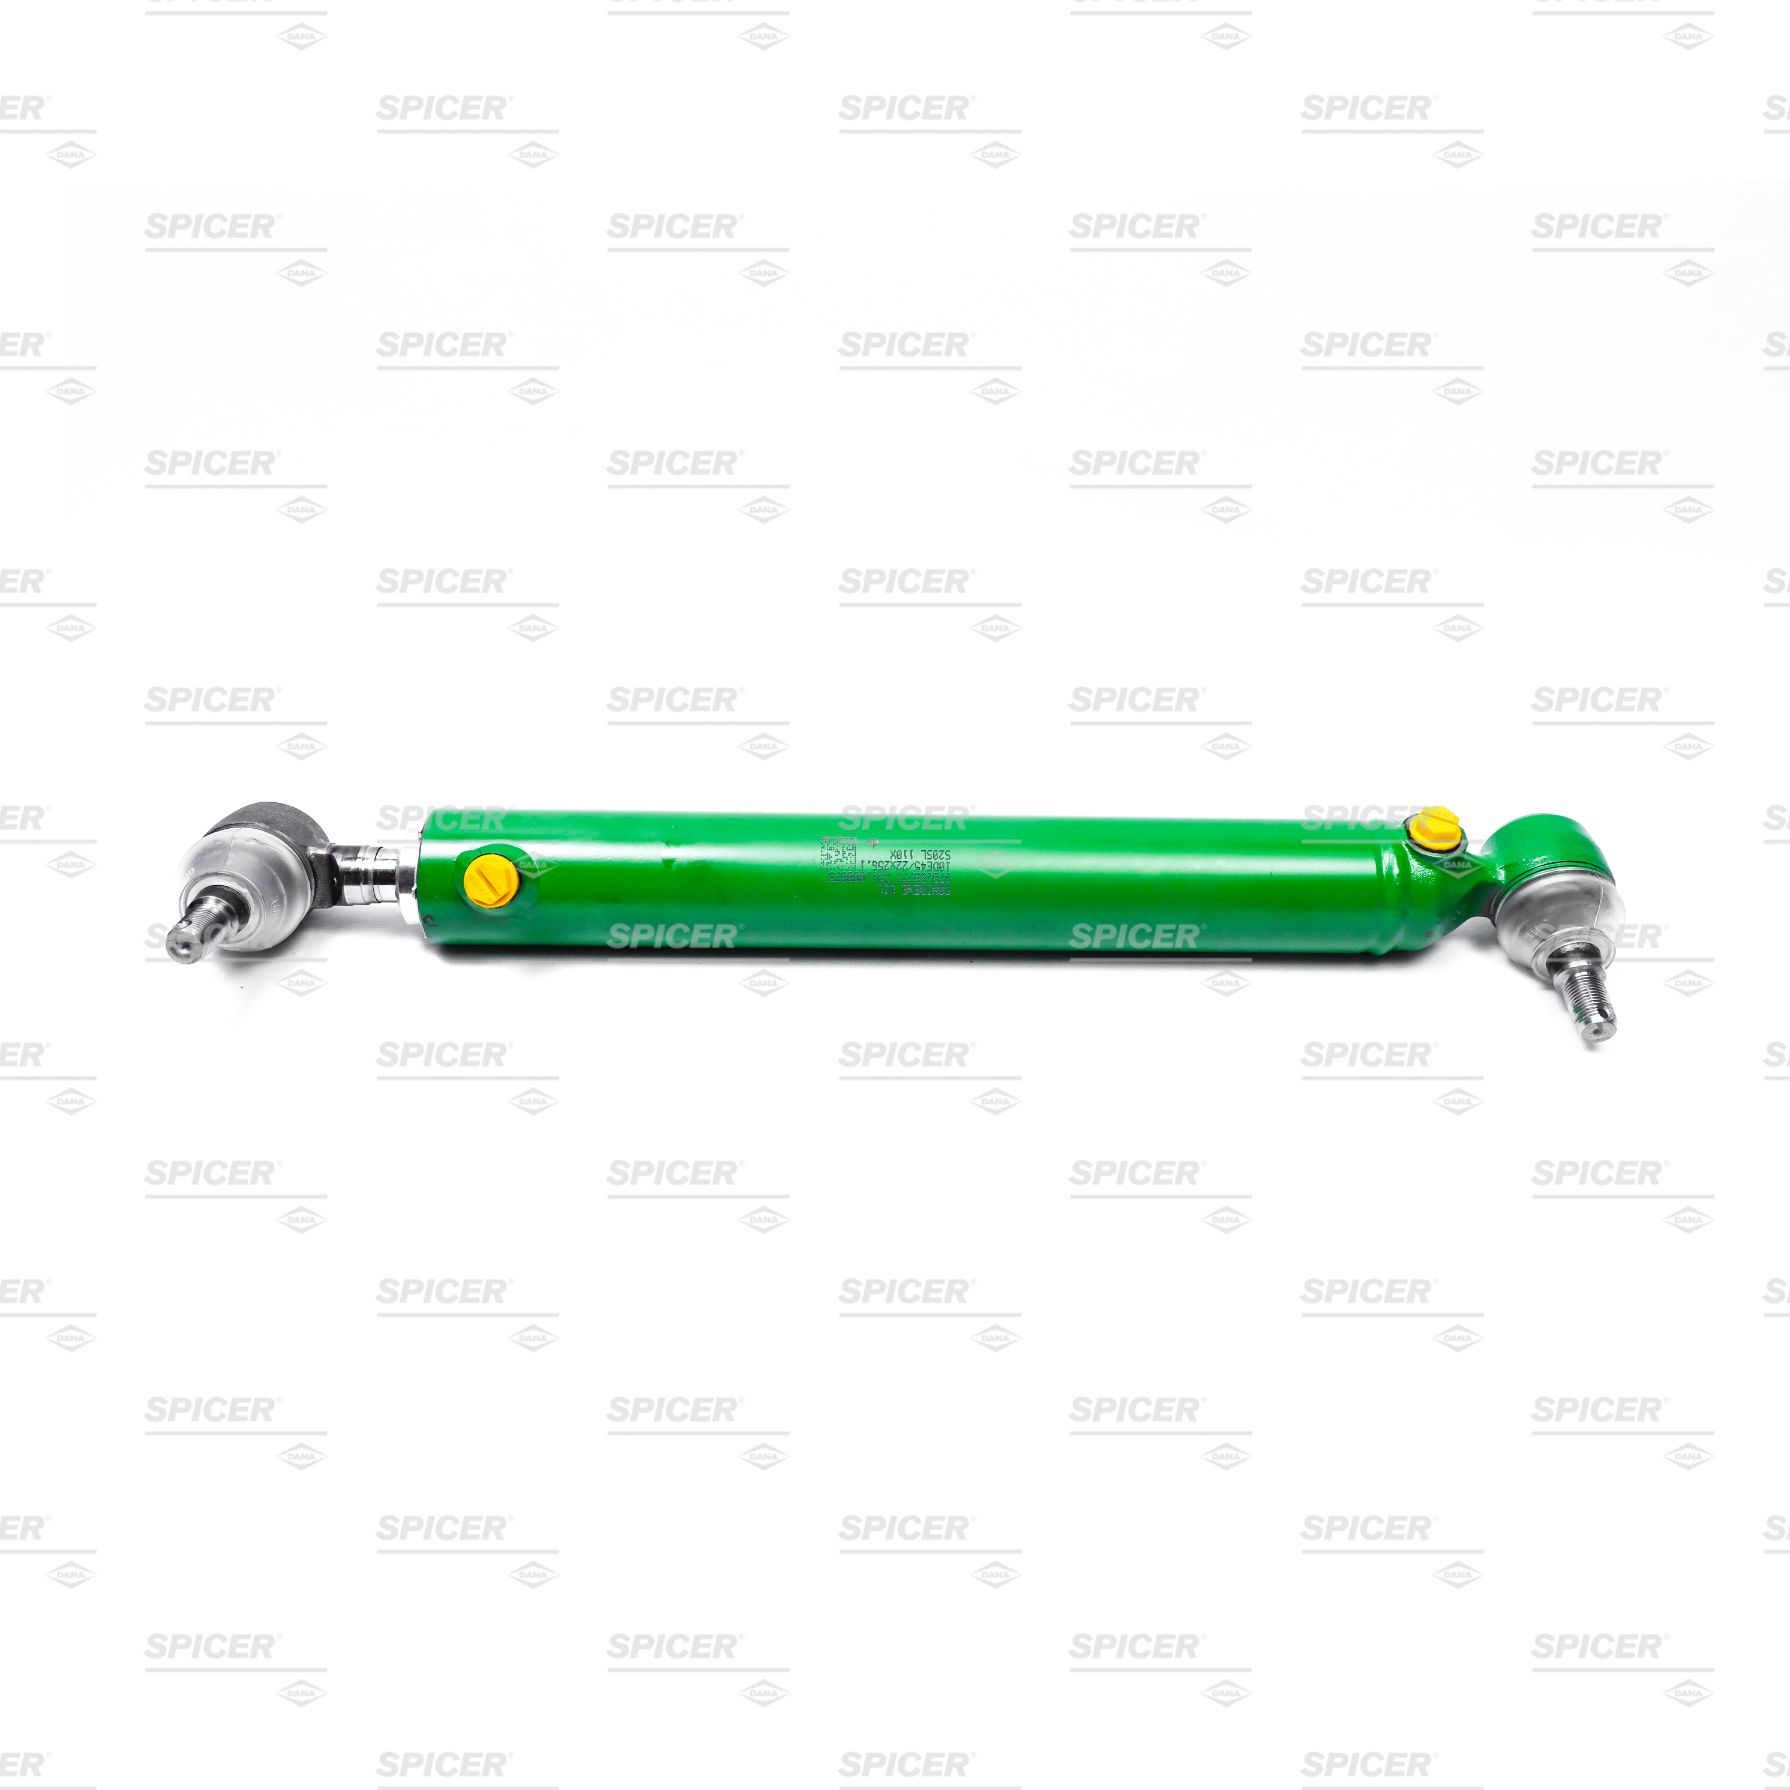 Spicer + Axle + Steering Components + Cylinder - Steer - See SEV-0969 + S20SL110-X_SP + buy